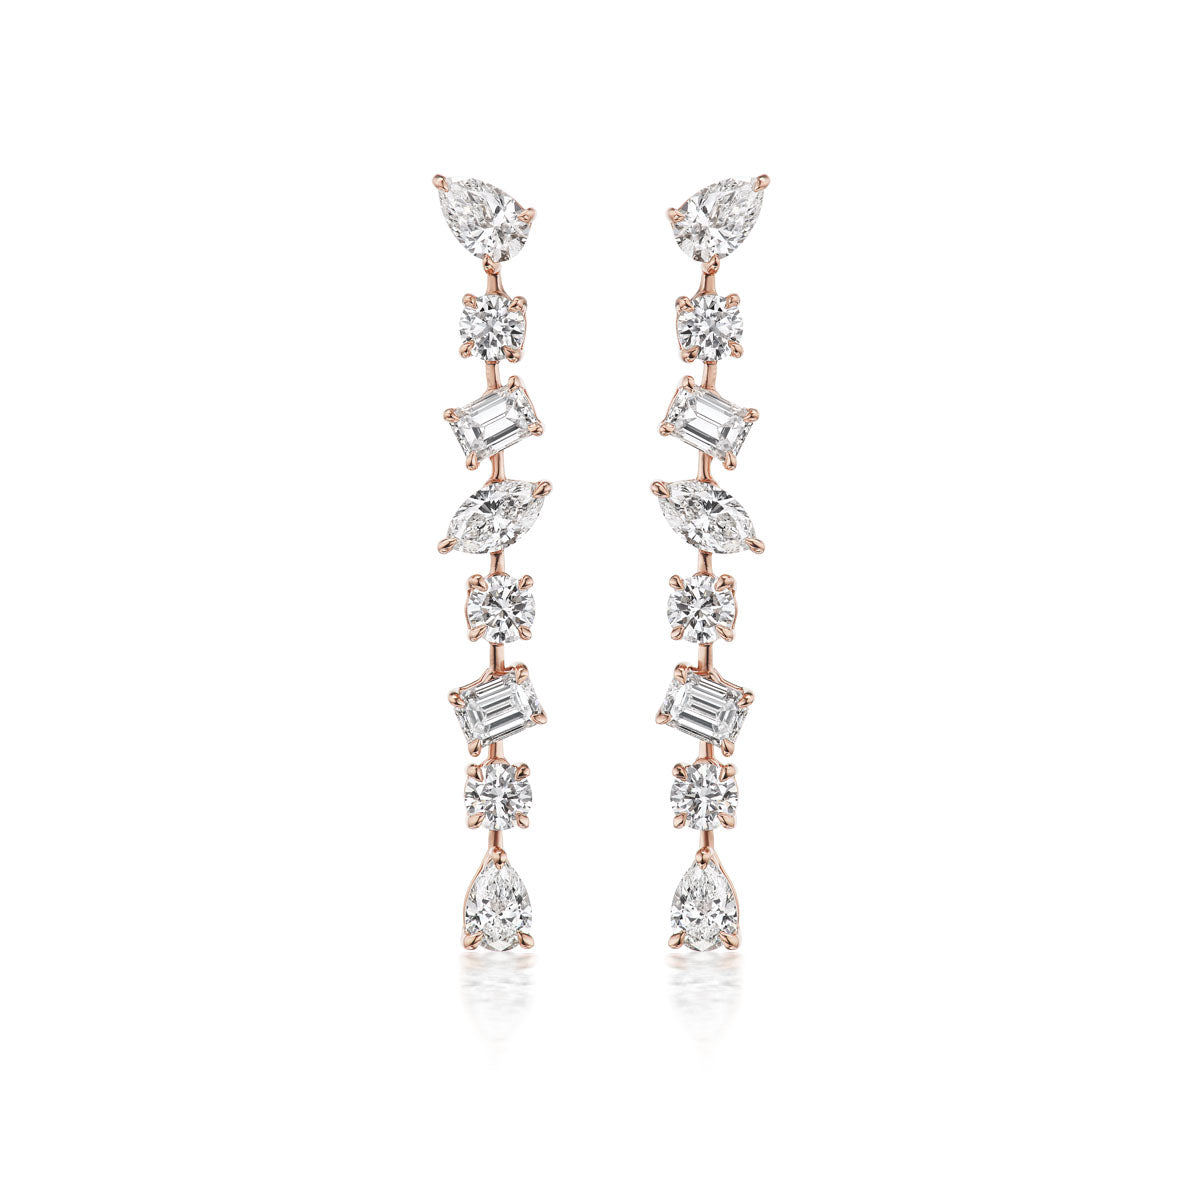 Tennis Drop Earrings in White Gold with Mixed Shape Diamonds